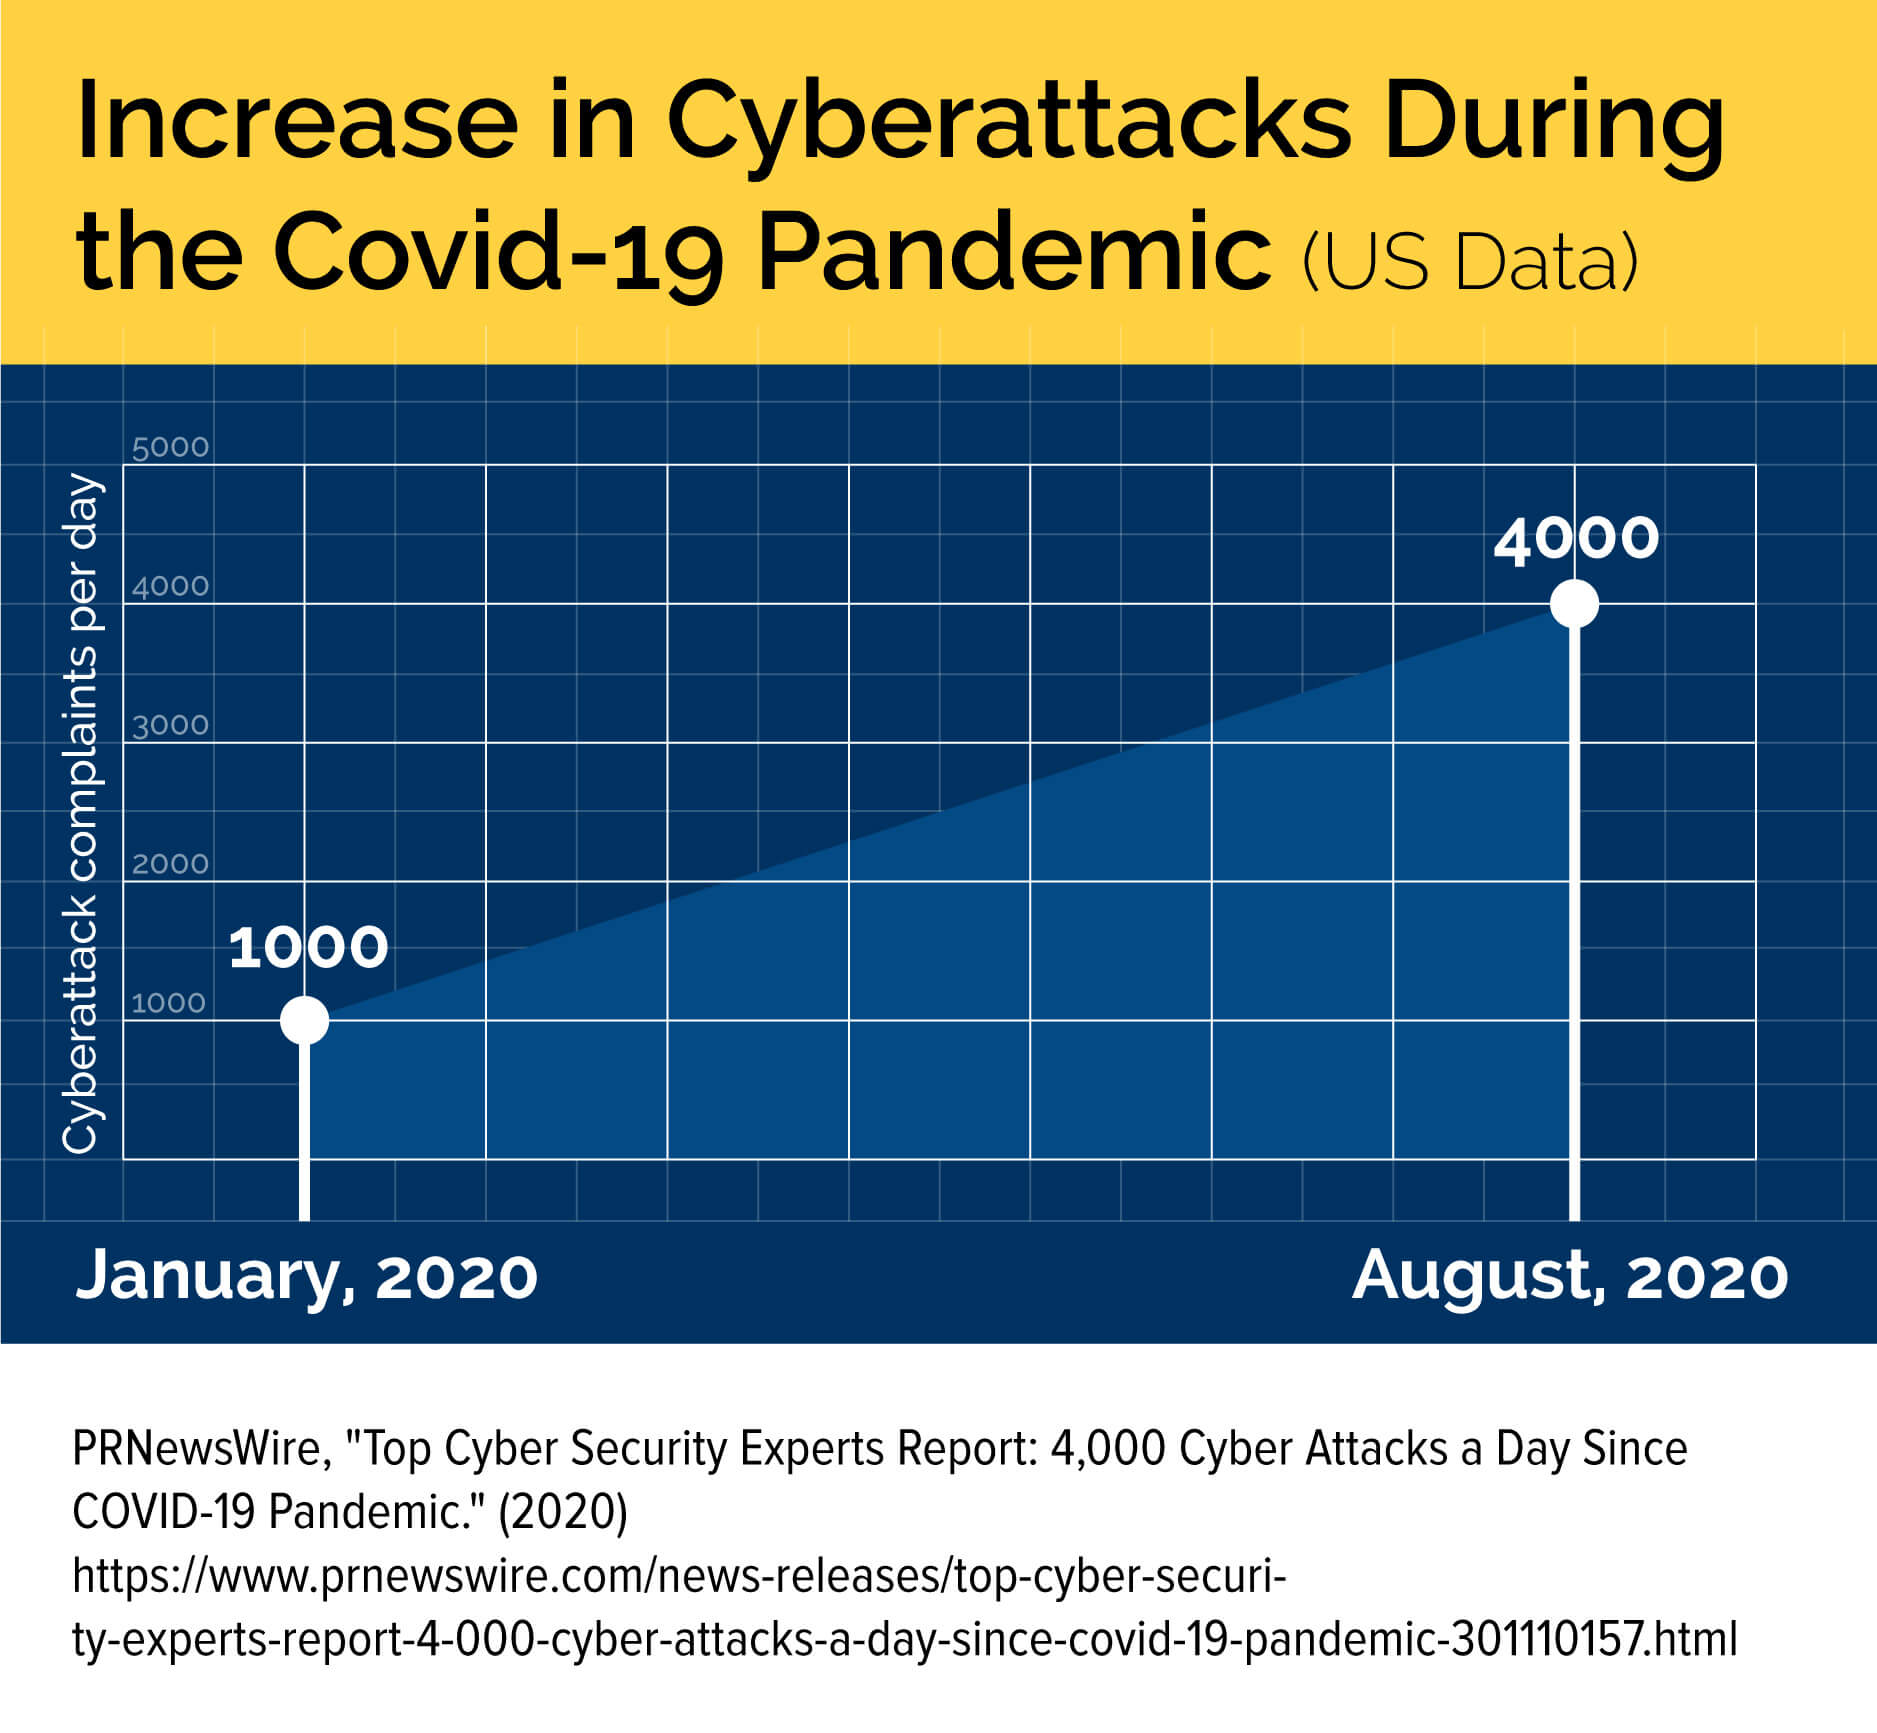 A chart showing the increase in cyberattacks during the COVID-19 pandemic.